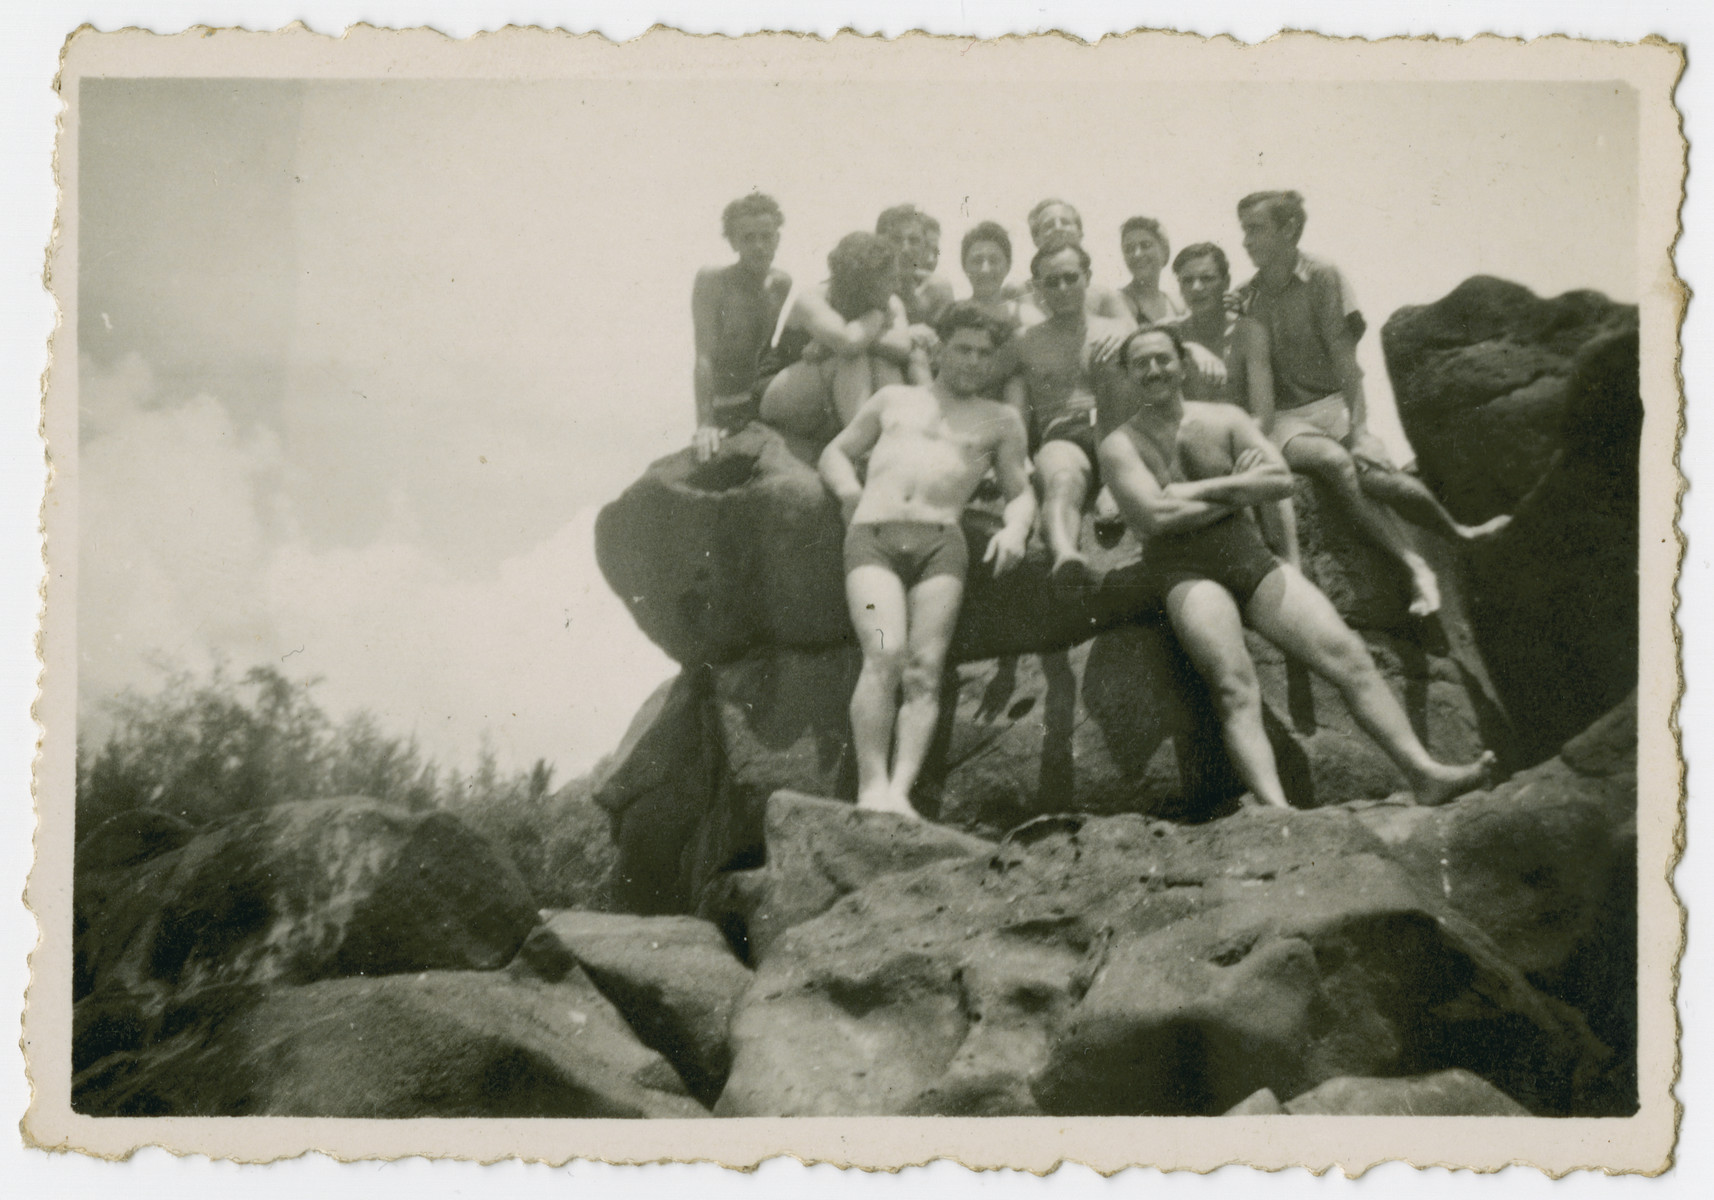 A group of internees on the island of Mauritius goes for a swim.

Hersh Makowski is pictured on the far right.